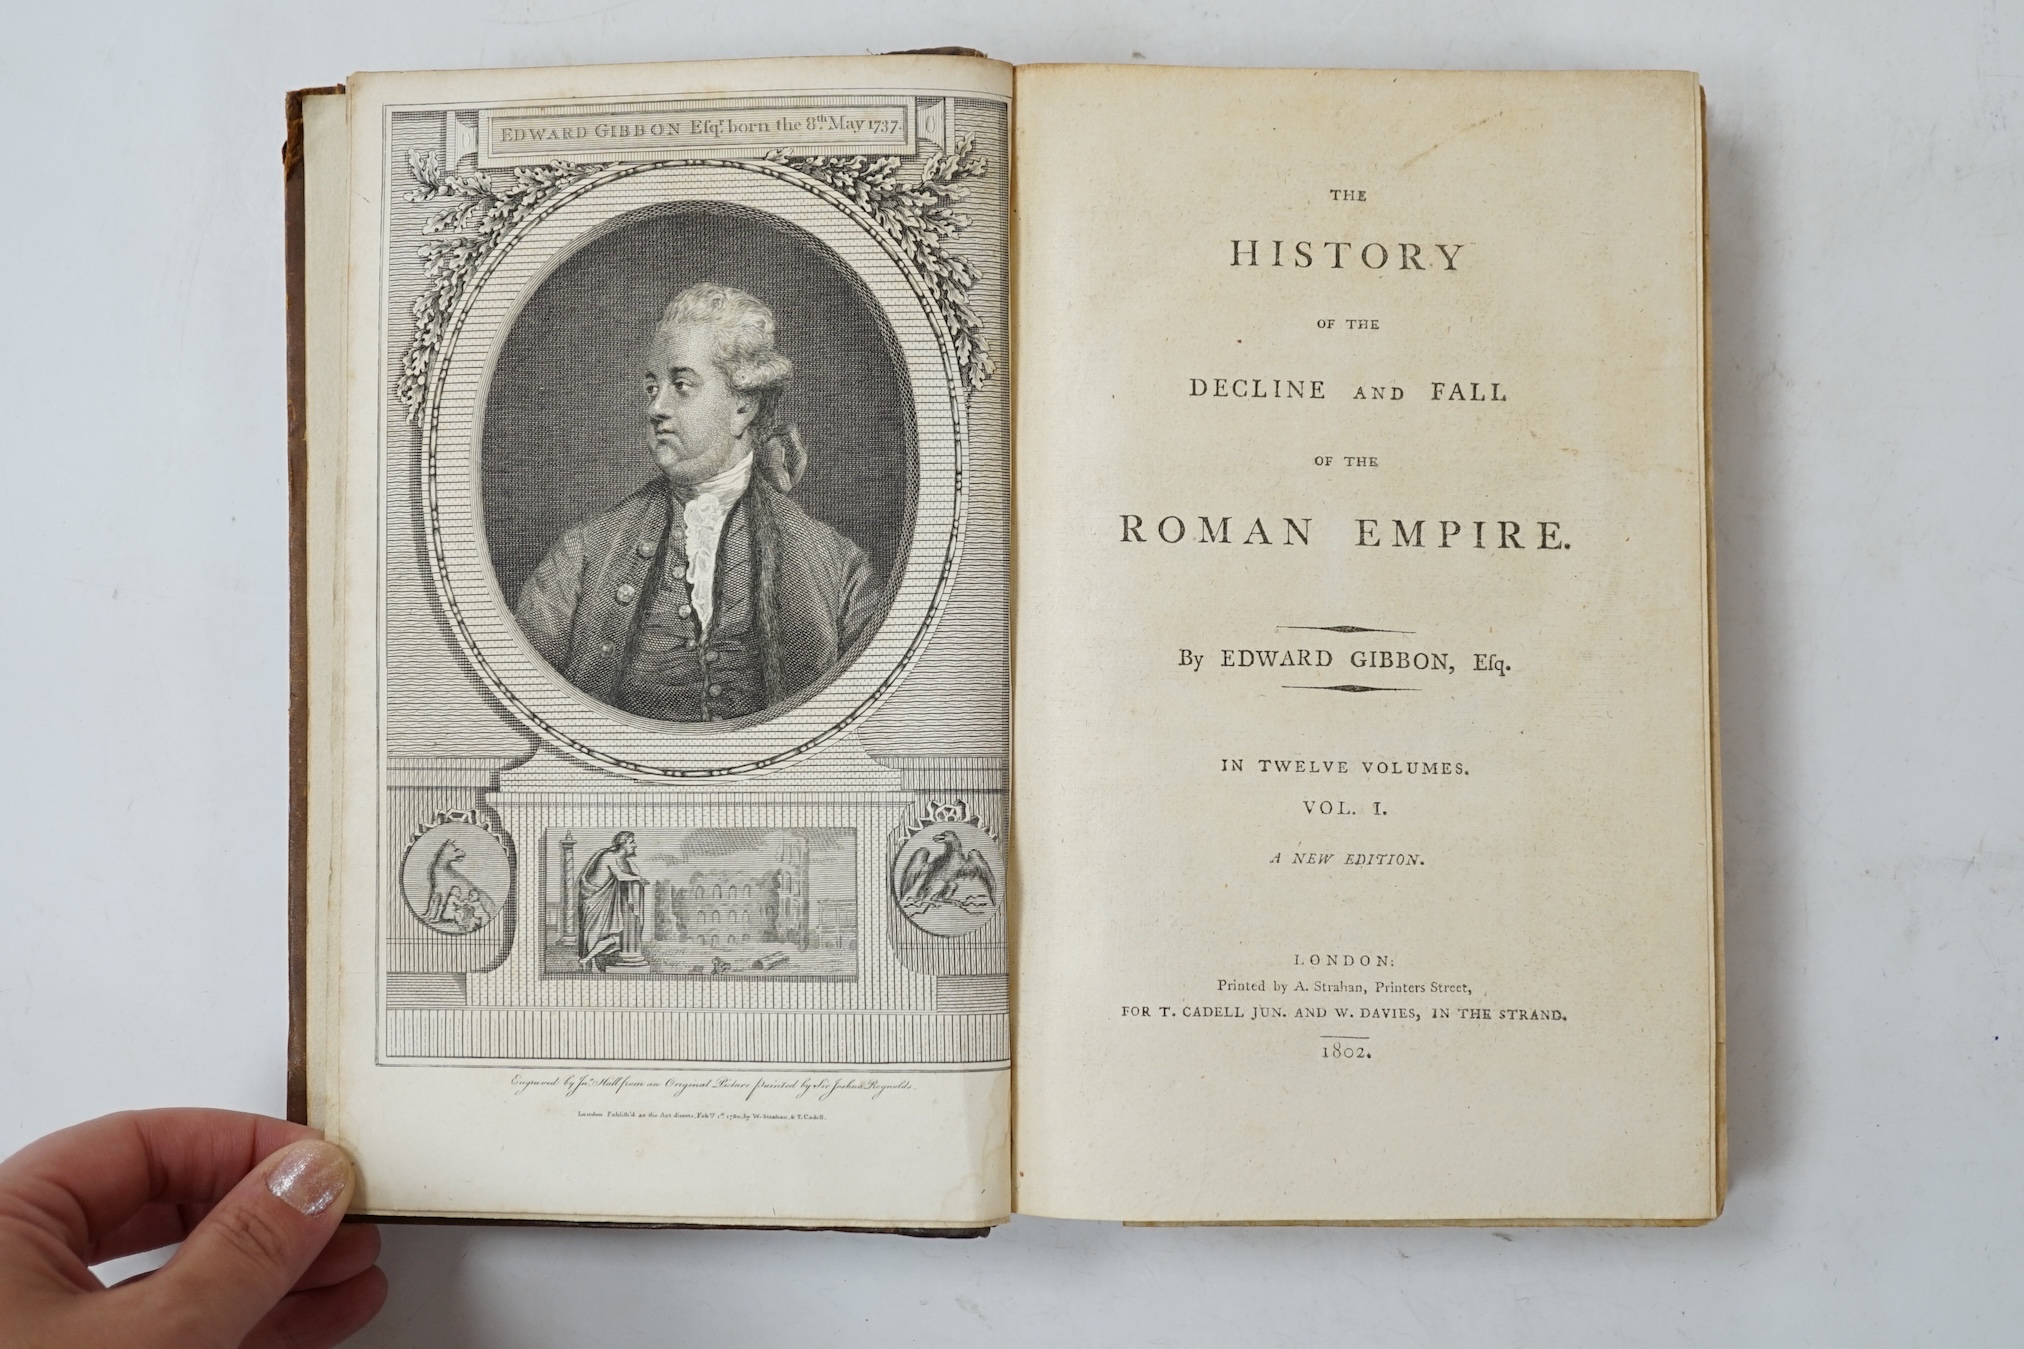 Gibbon, Edward - The History of the Decline and Fall of the Roman Empire, with three maps and portrait, full calf, 12 vols, ex-libris Frederick Charles Spencer and Aubrey Vere Spencer, 1802